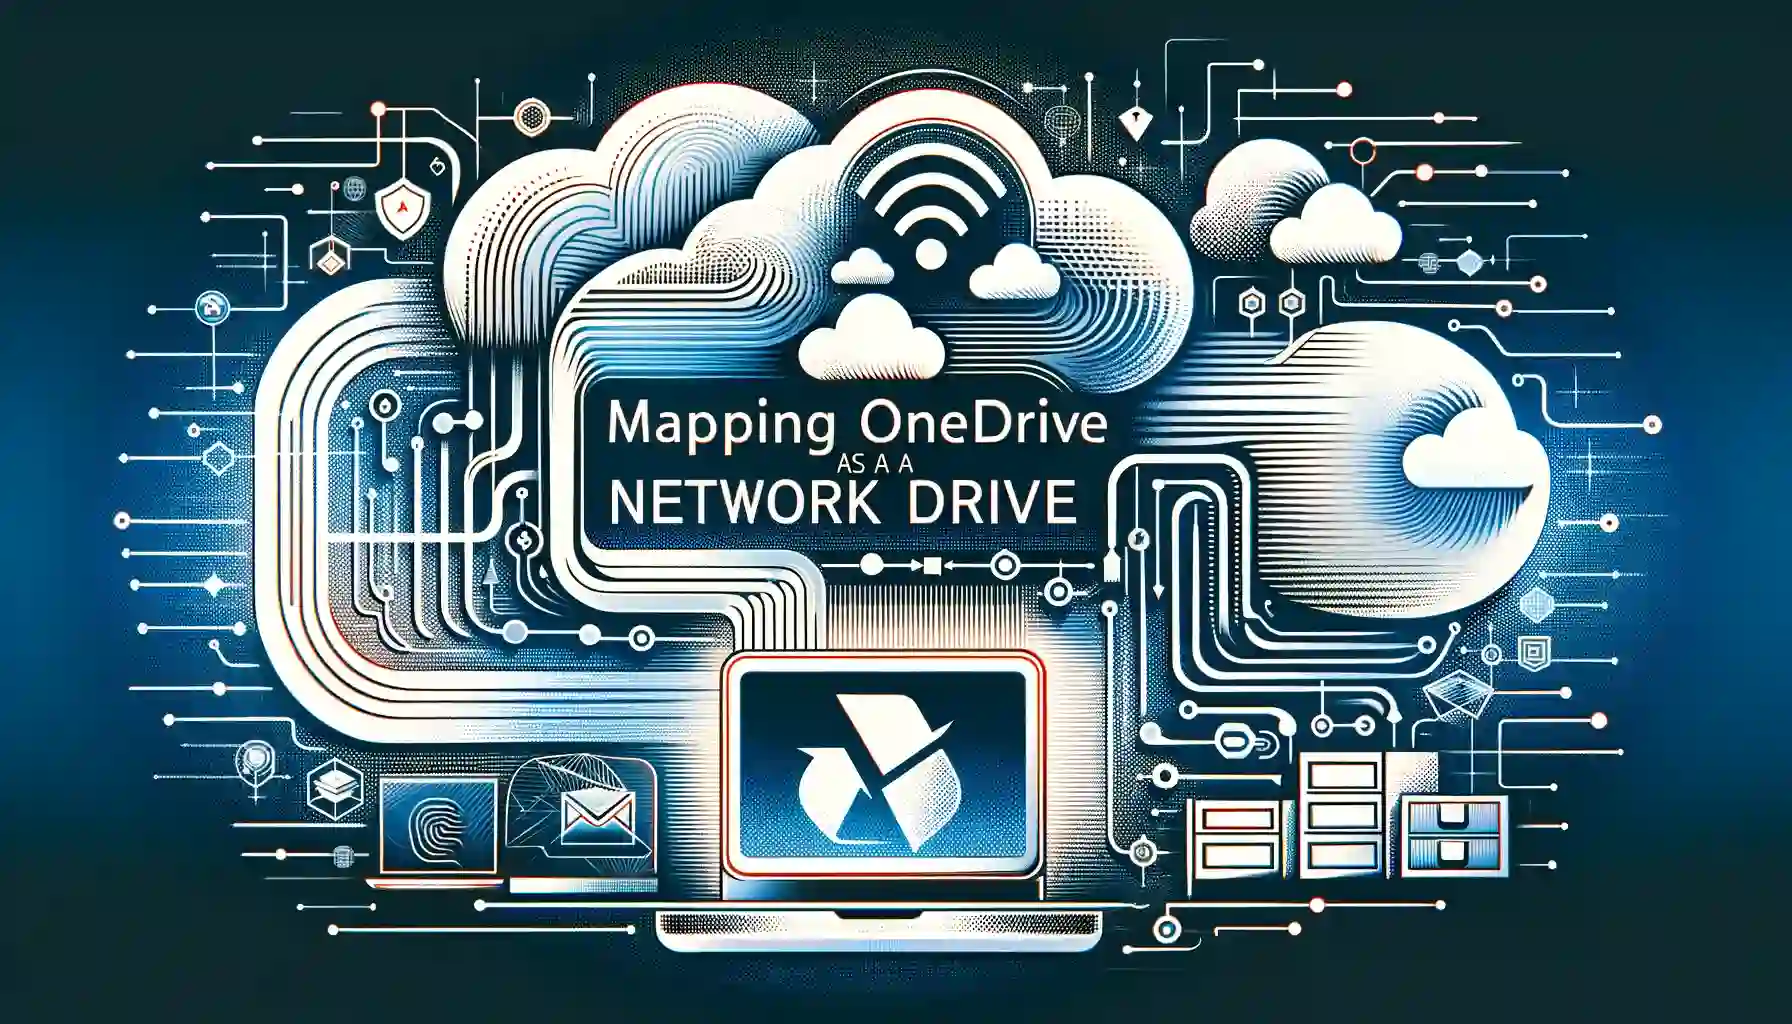 Mapping OneDrive as a Network Drive